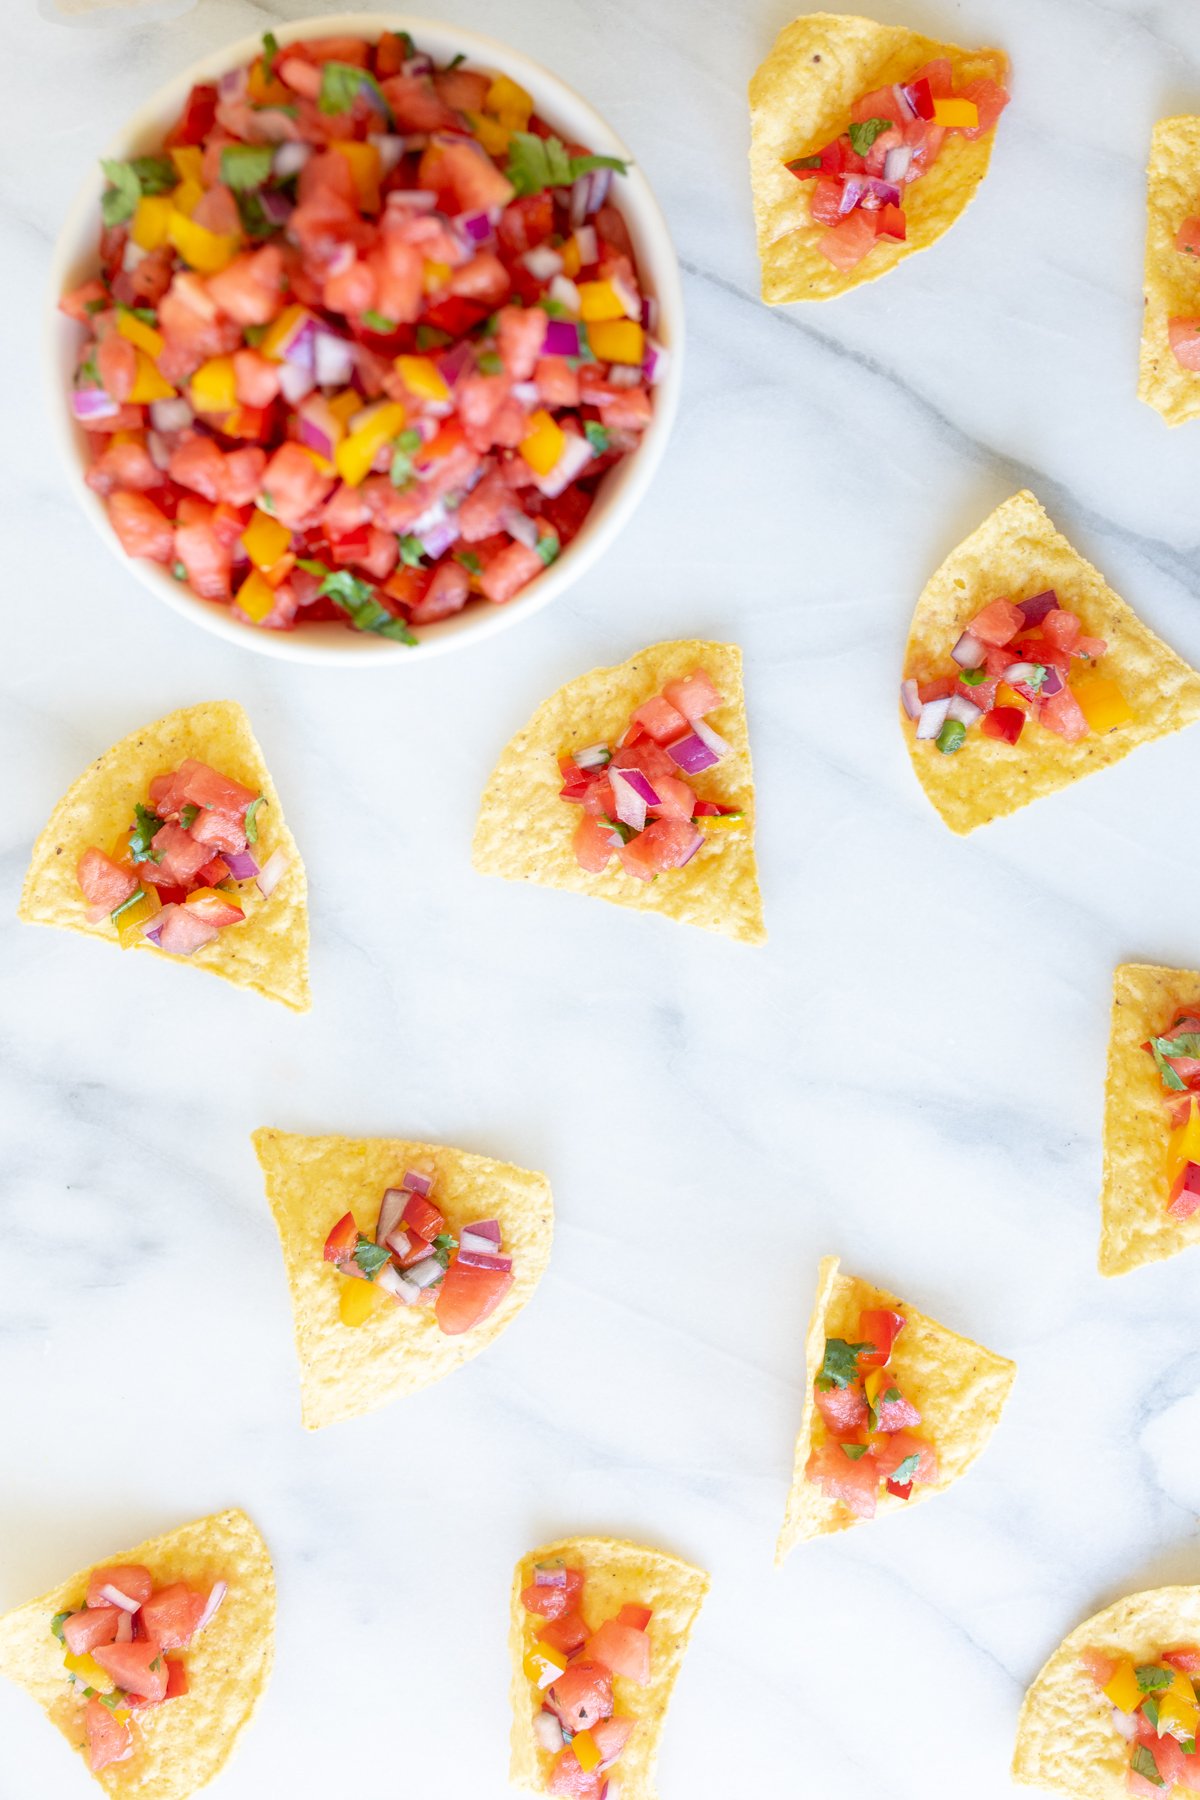 Tortilla chips topped with fresh salsa recipes arranged neatly around a bowl of salsa on a marble surface.